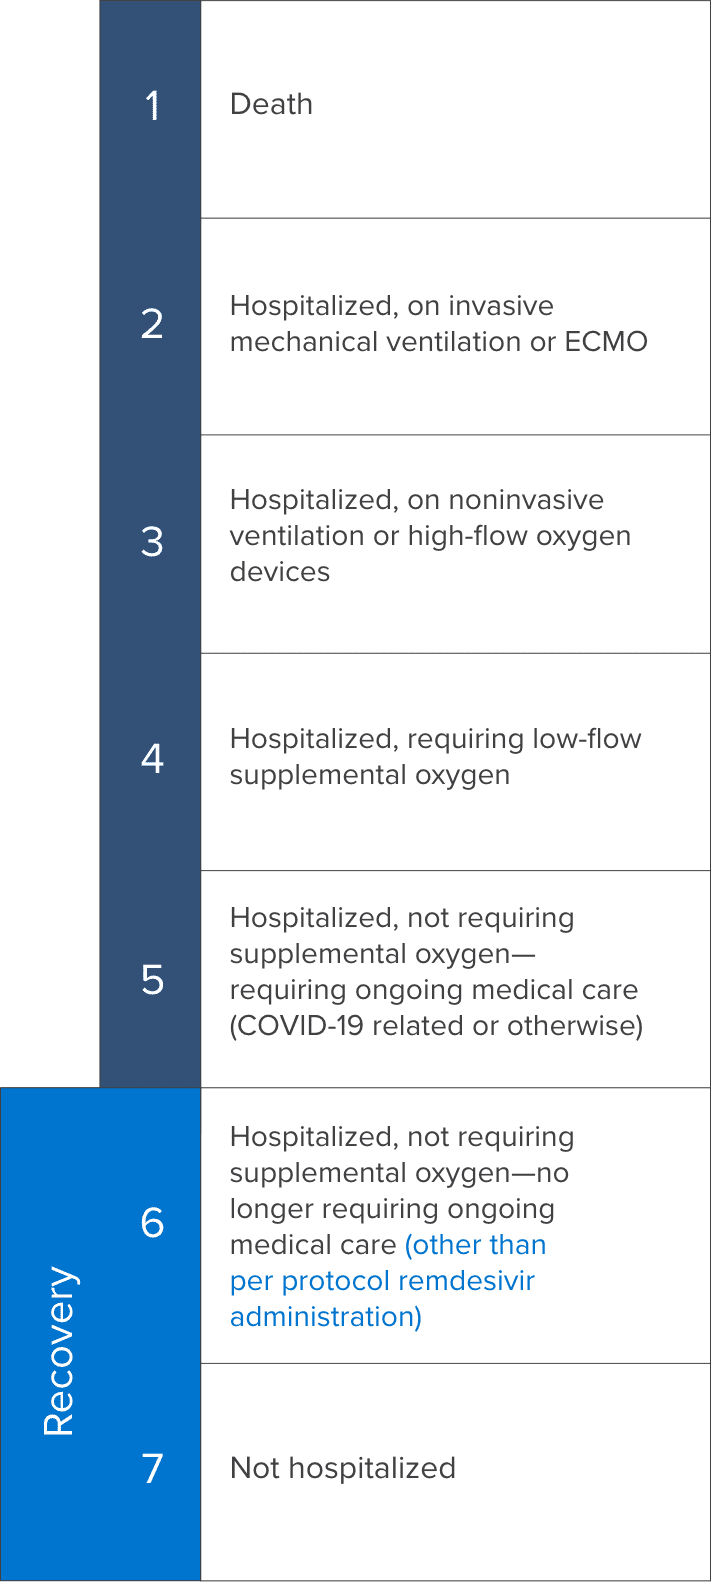 A graphic showing the patient's clinical status assessed on a 7-point ordinal scale